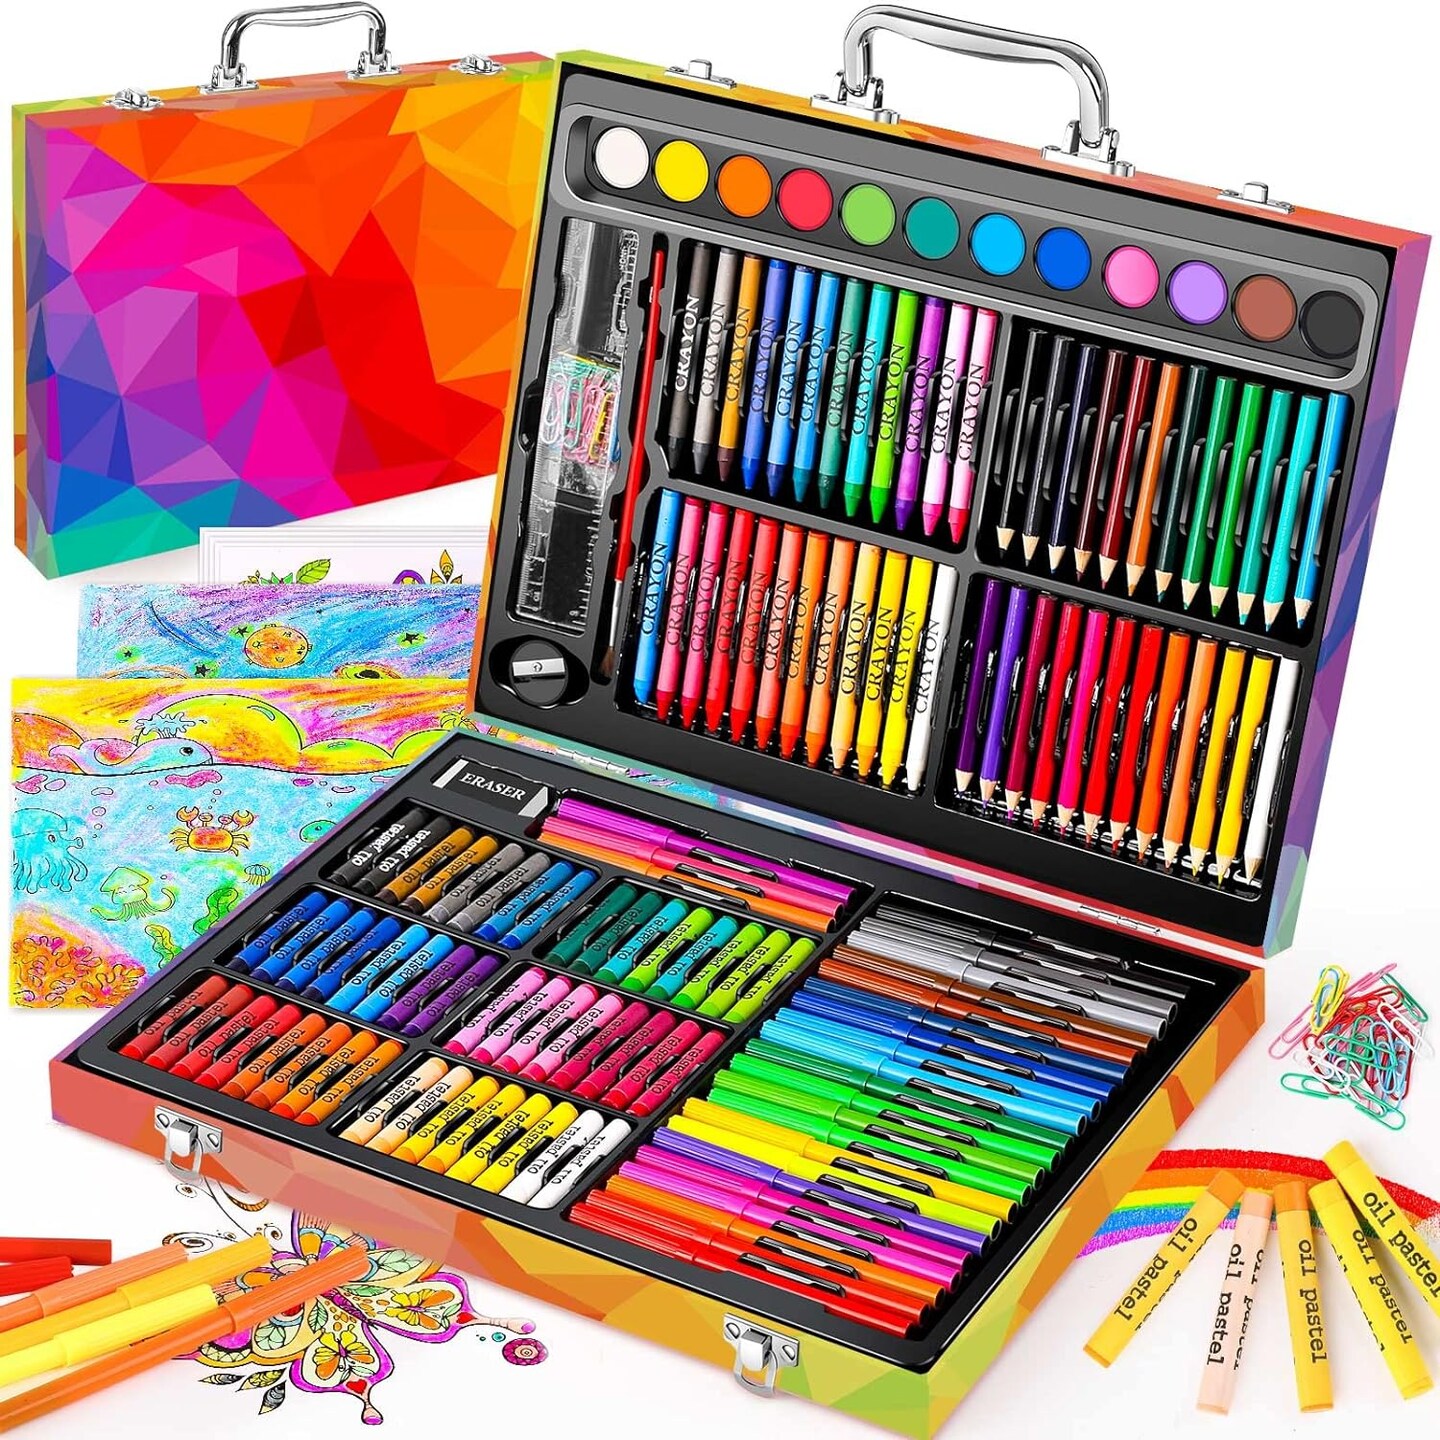 Arts and Crafts Supplies, 183-Pack Drawing Painting Set for Kids Girls Boys Teens, Coloring Art Kit Gift Case: Crayons, Oil Pastels, Watercolors Cake, Colored Pencils Markers, Sketch Paper